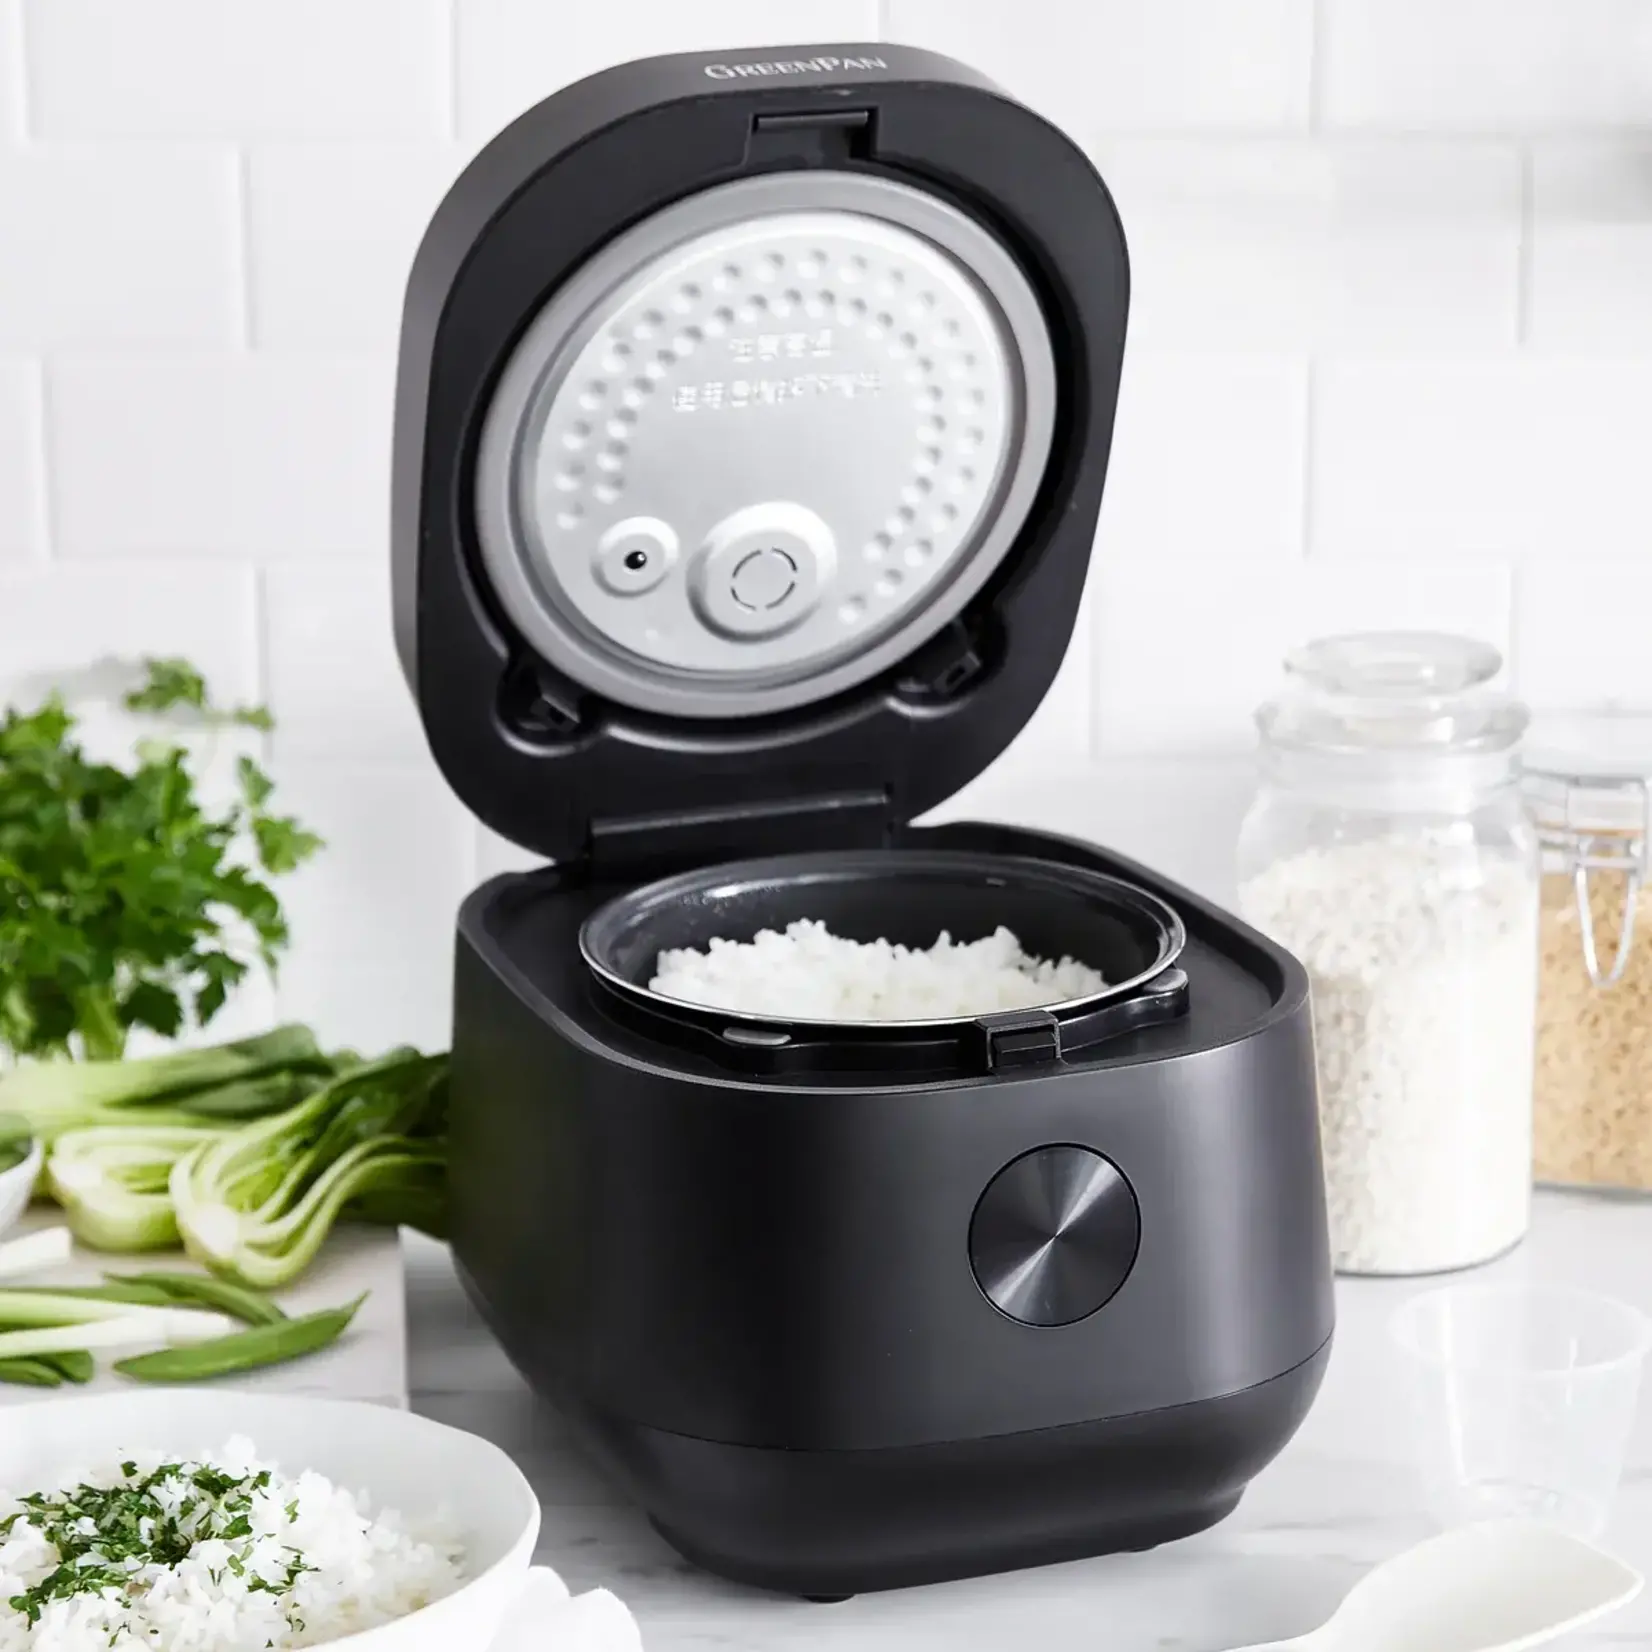 GreenPan Bistro 8-Cup Traditional Rice Cooker